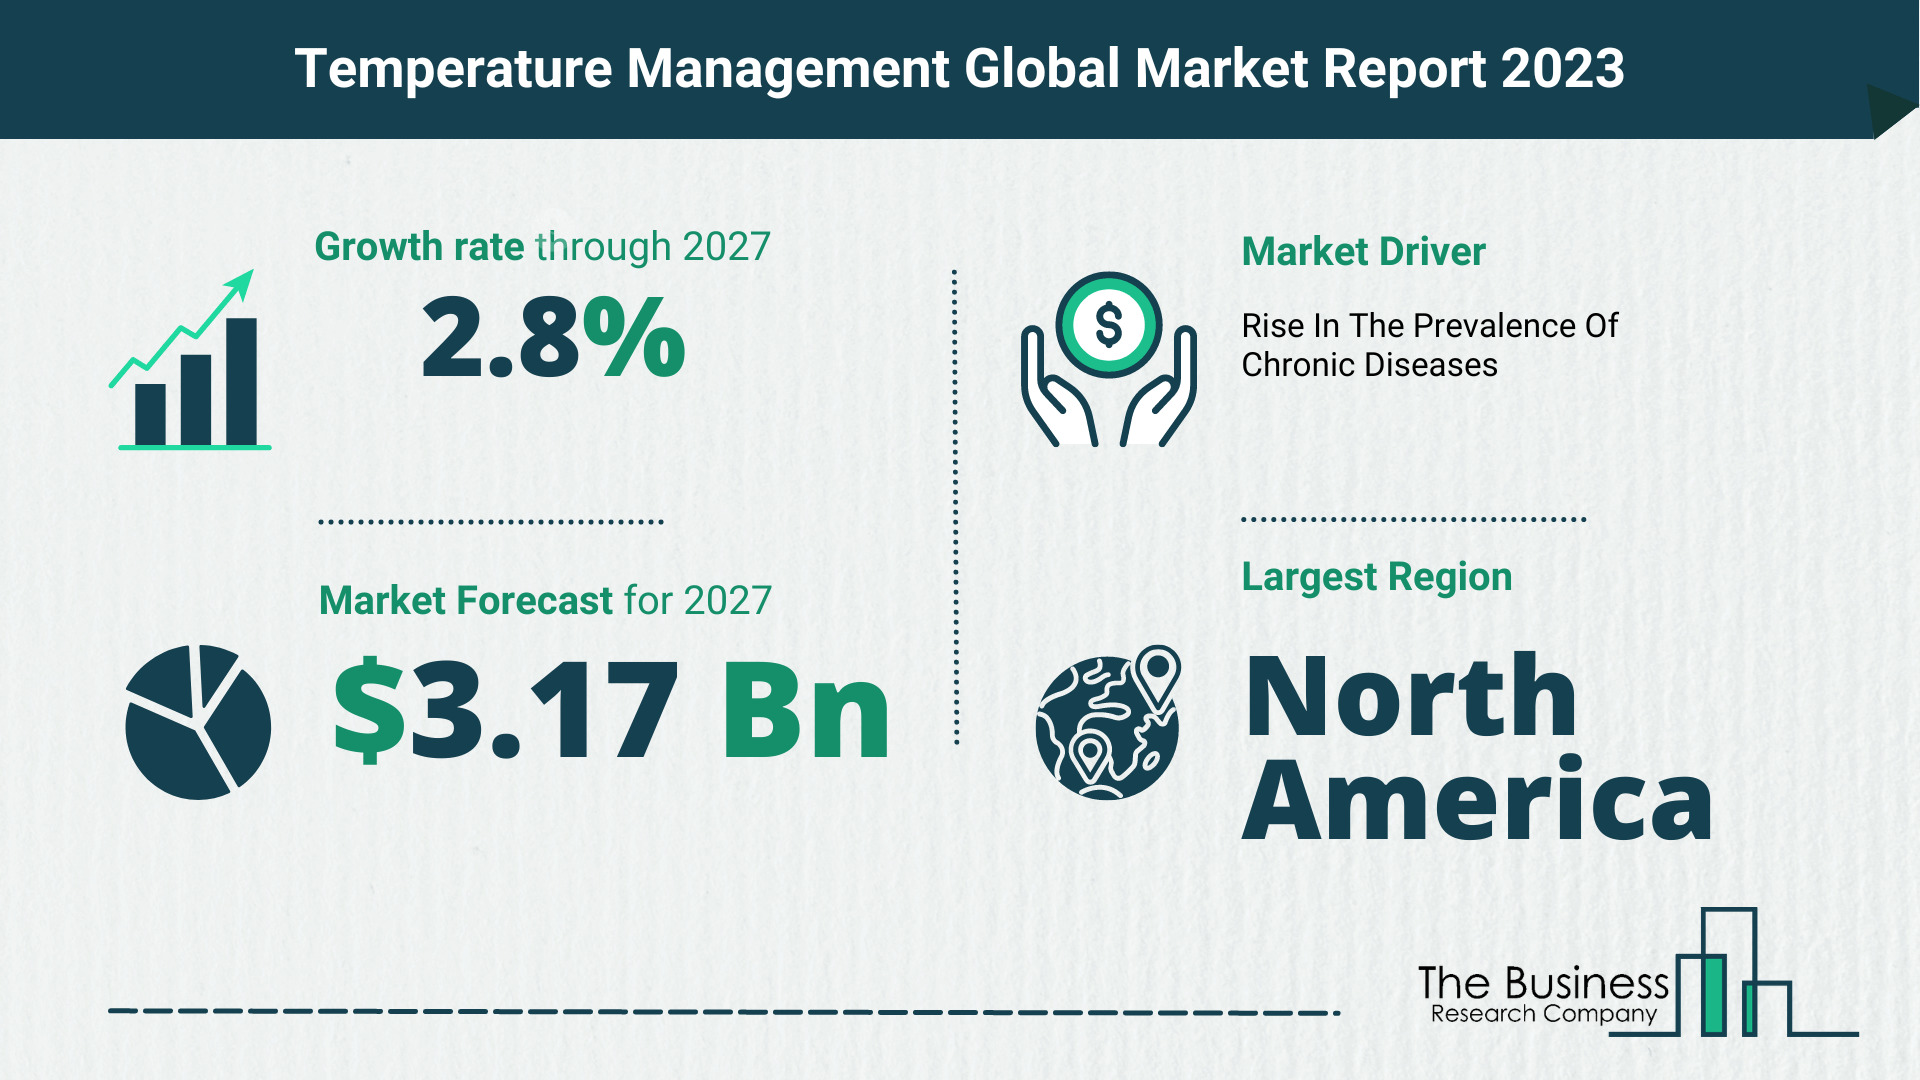 Global Temperature Management Market Opportunities And Strategies 2023